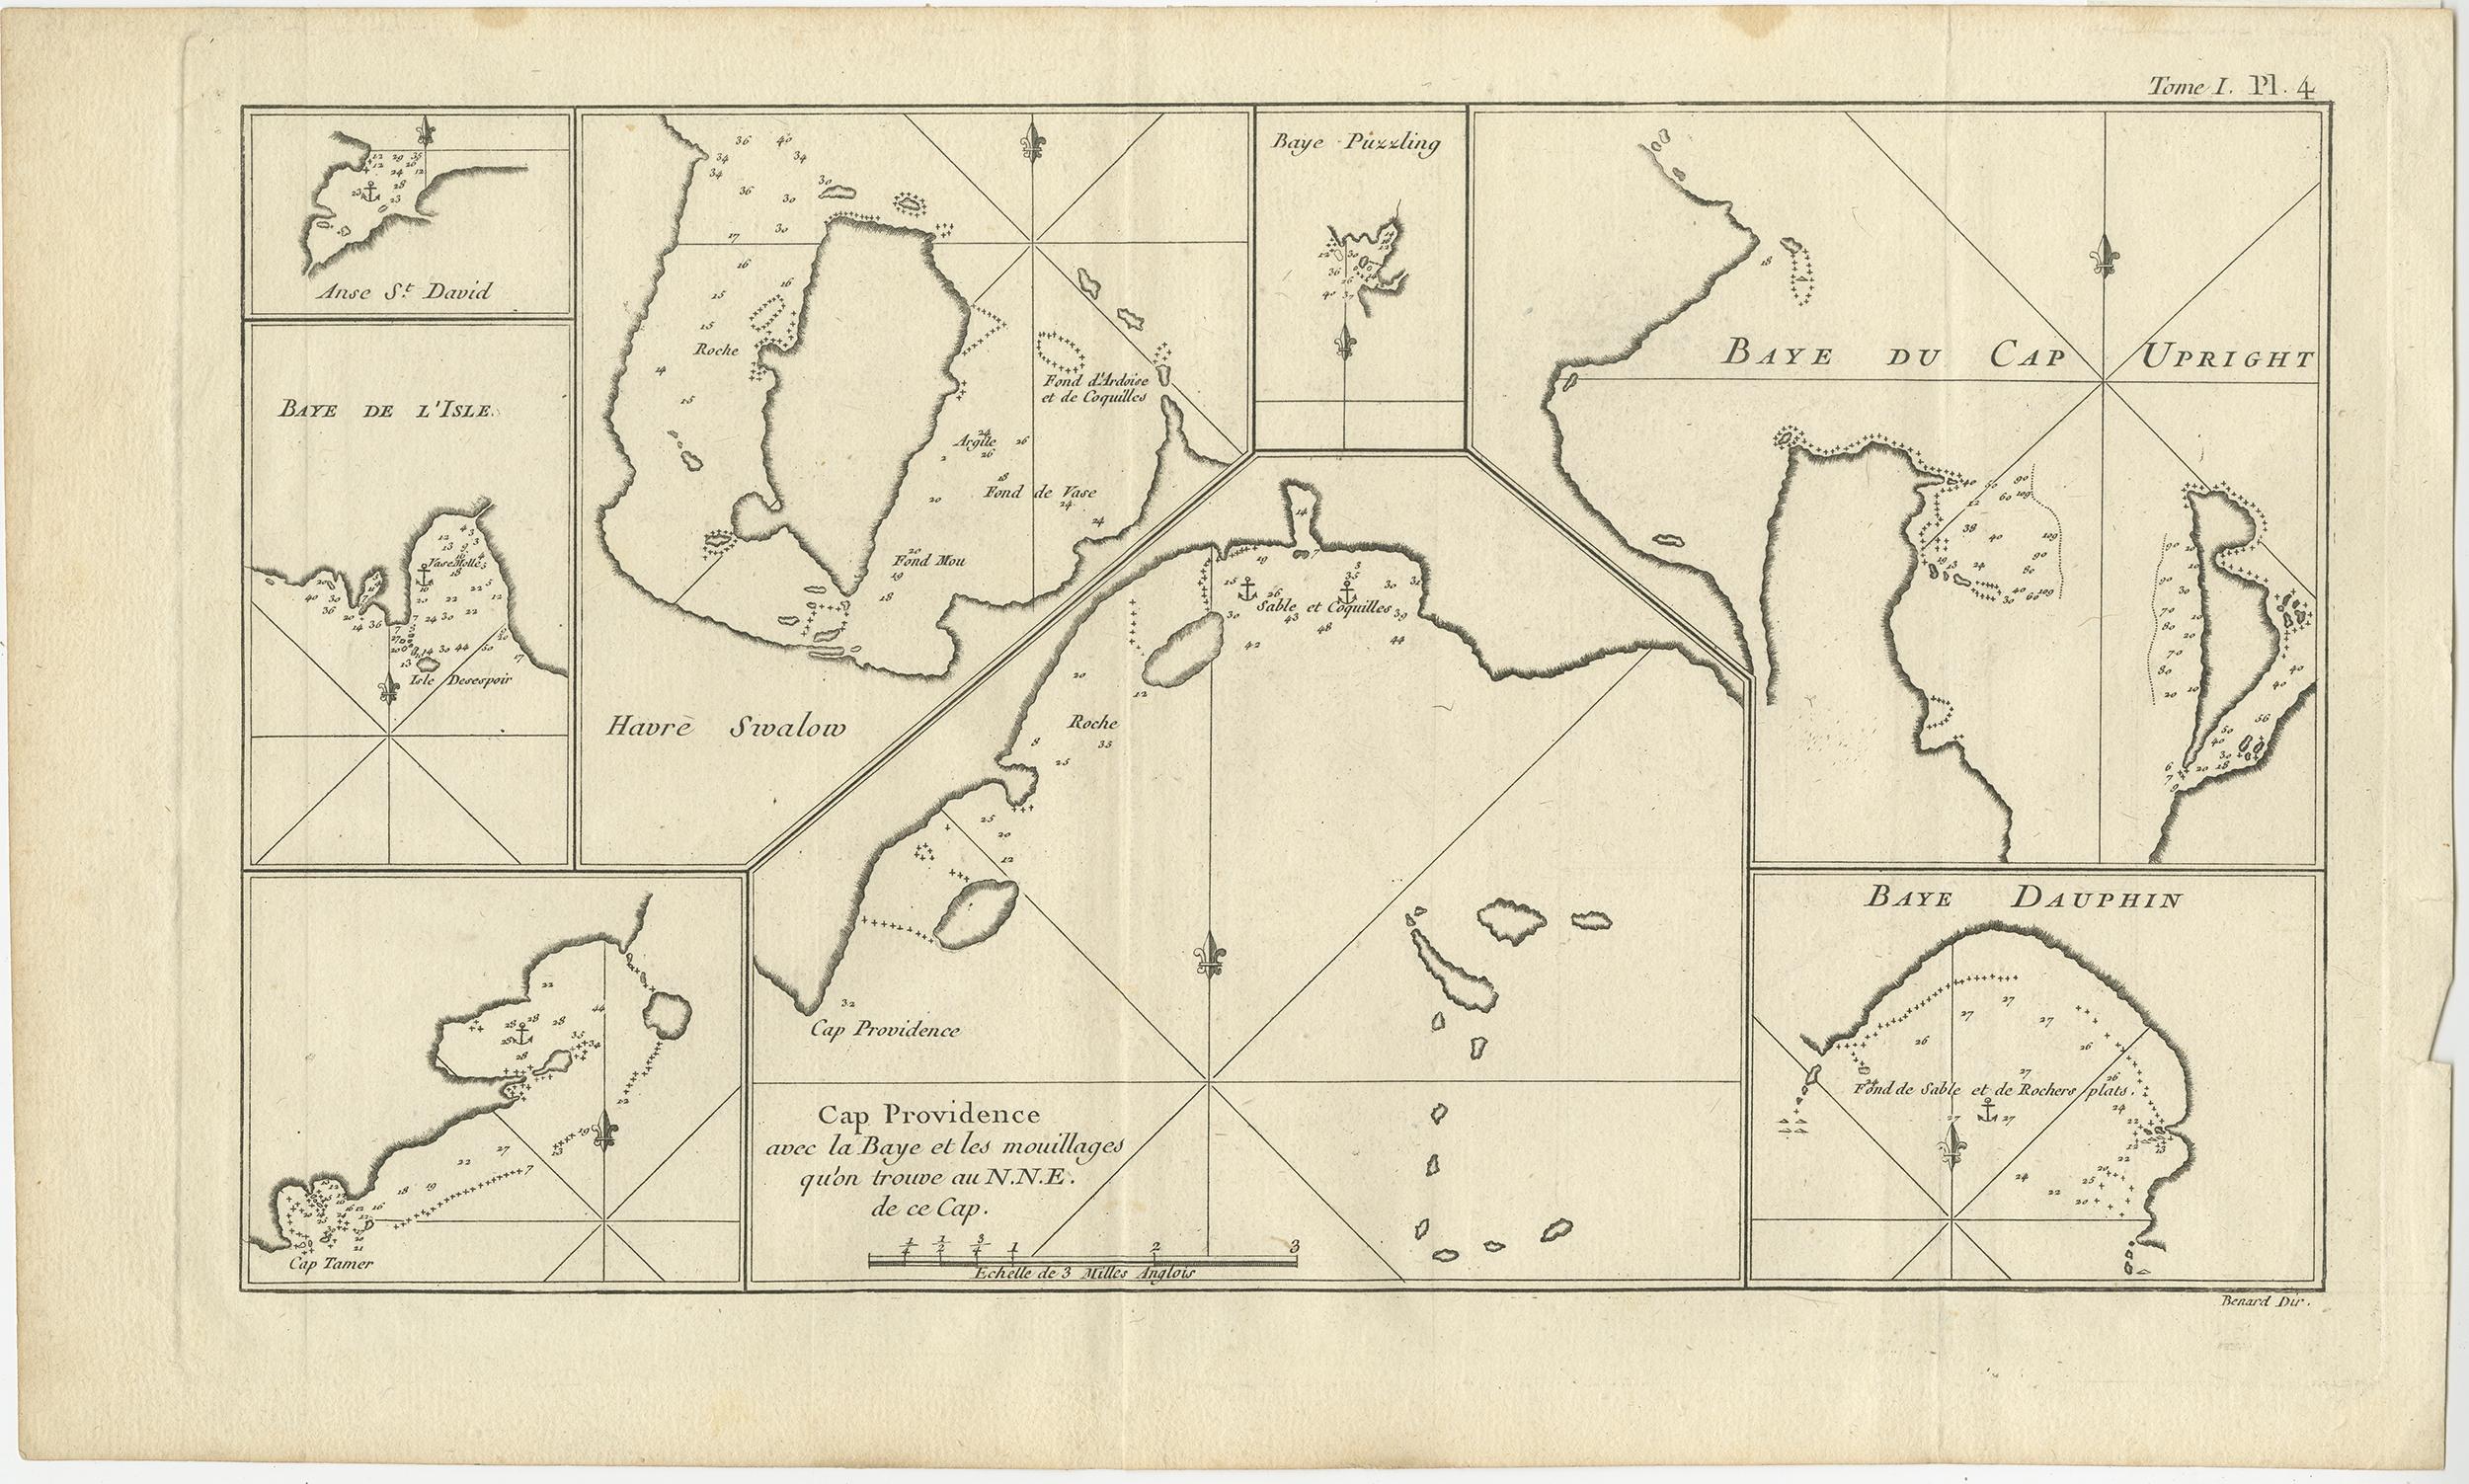 Antique map titled 'Baye du Cap Upright (..)'. Eight charts on one sheet of Cap Providence, St. David's Cove, the Bay of the Island, Swallow's Haven, Puzzling Bay, Baye du Cape Upright 's Bay, Dauphina's Bay. This map originates from the French